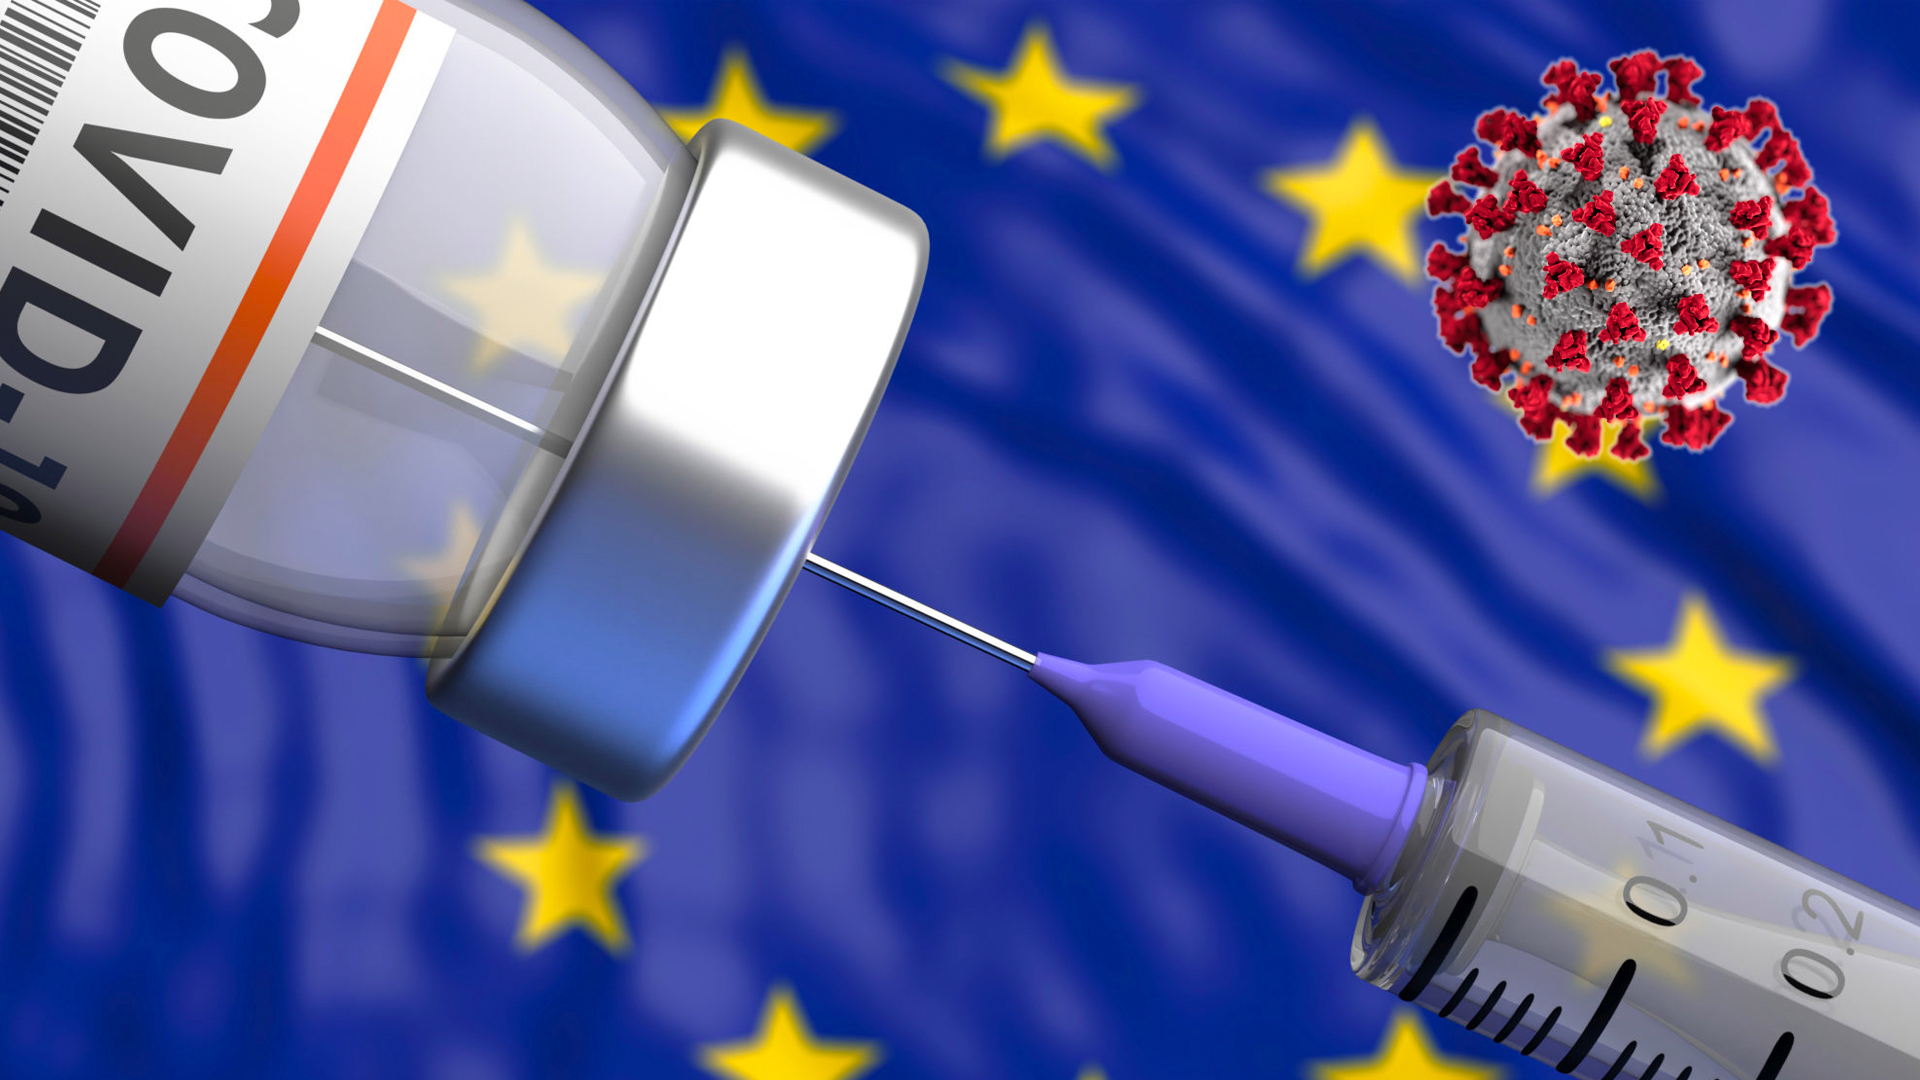 European Union ramps up vaccination efforts to beat back COVID-19 spike